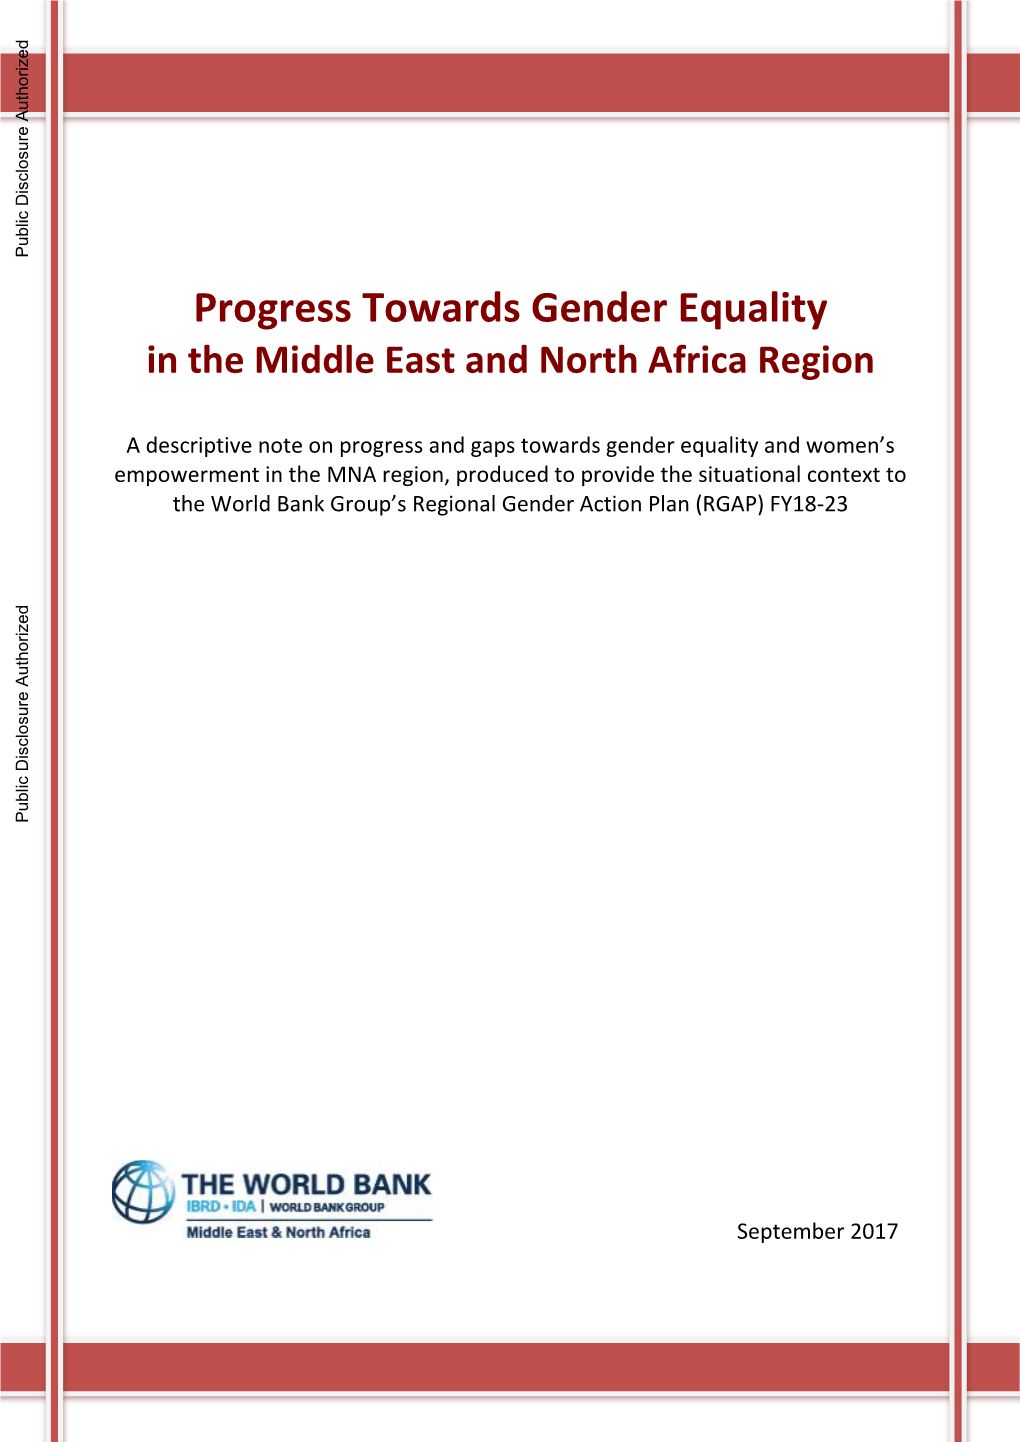 Progress Towards Gender Equality in the Middle East and North Africa Region